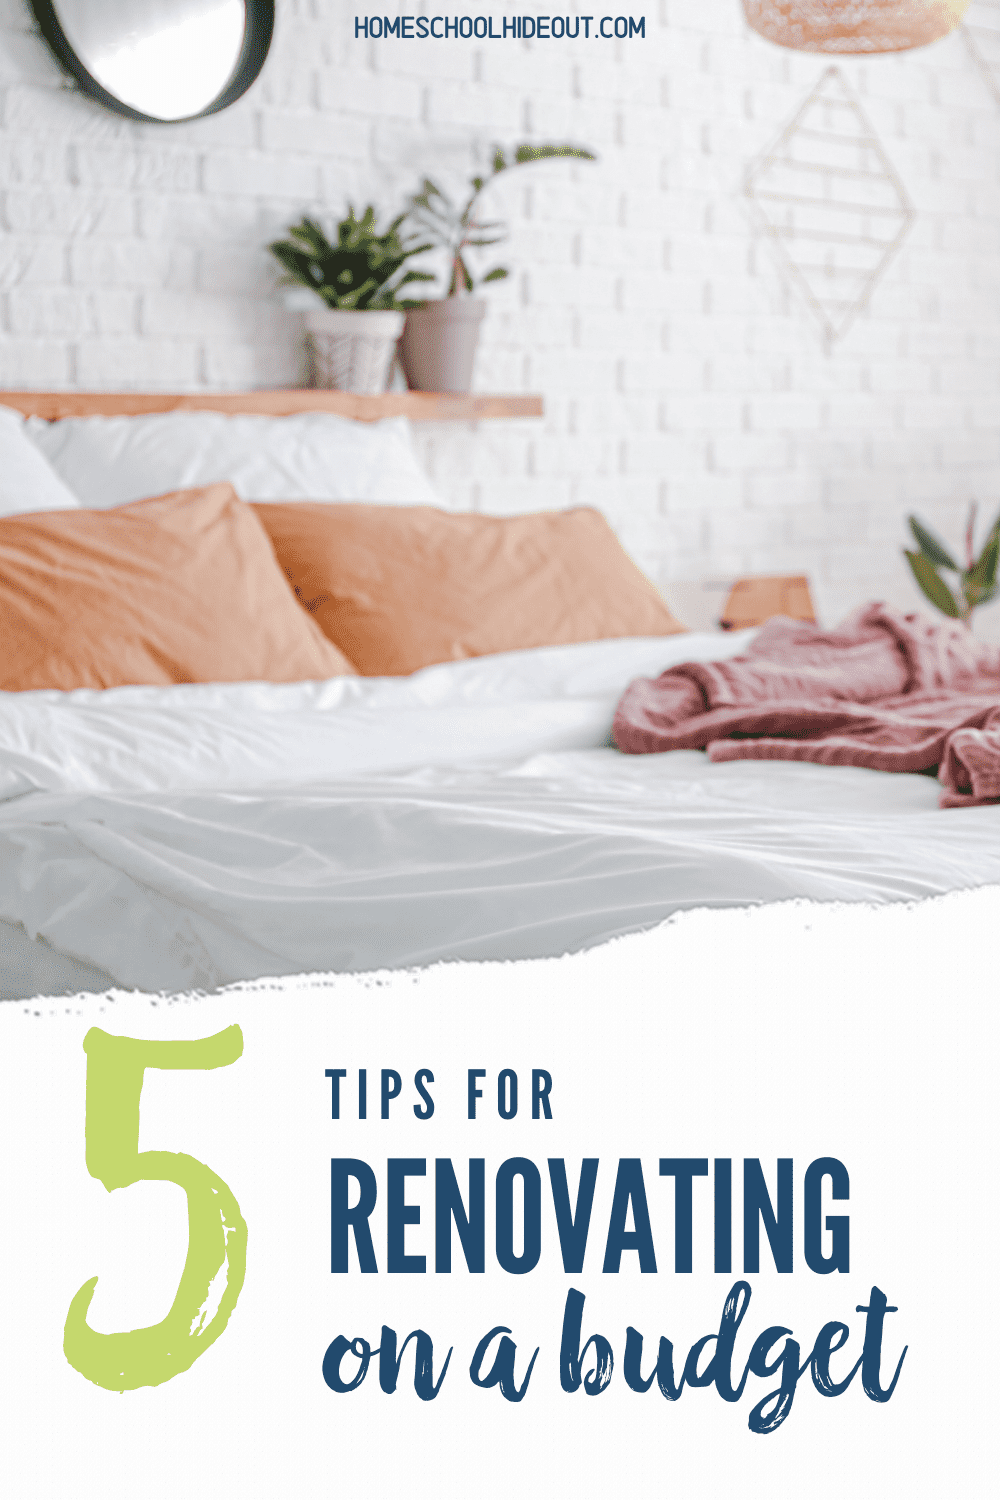 Renovating a house on a budget is no easy task but these ideas will make it so much easier. I never would've thought of #4!